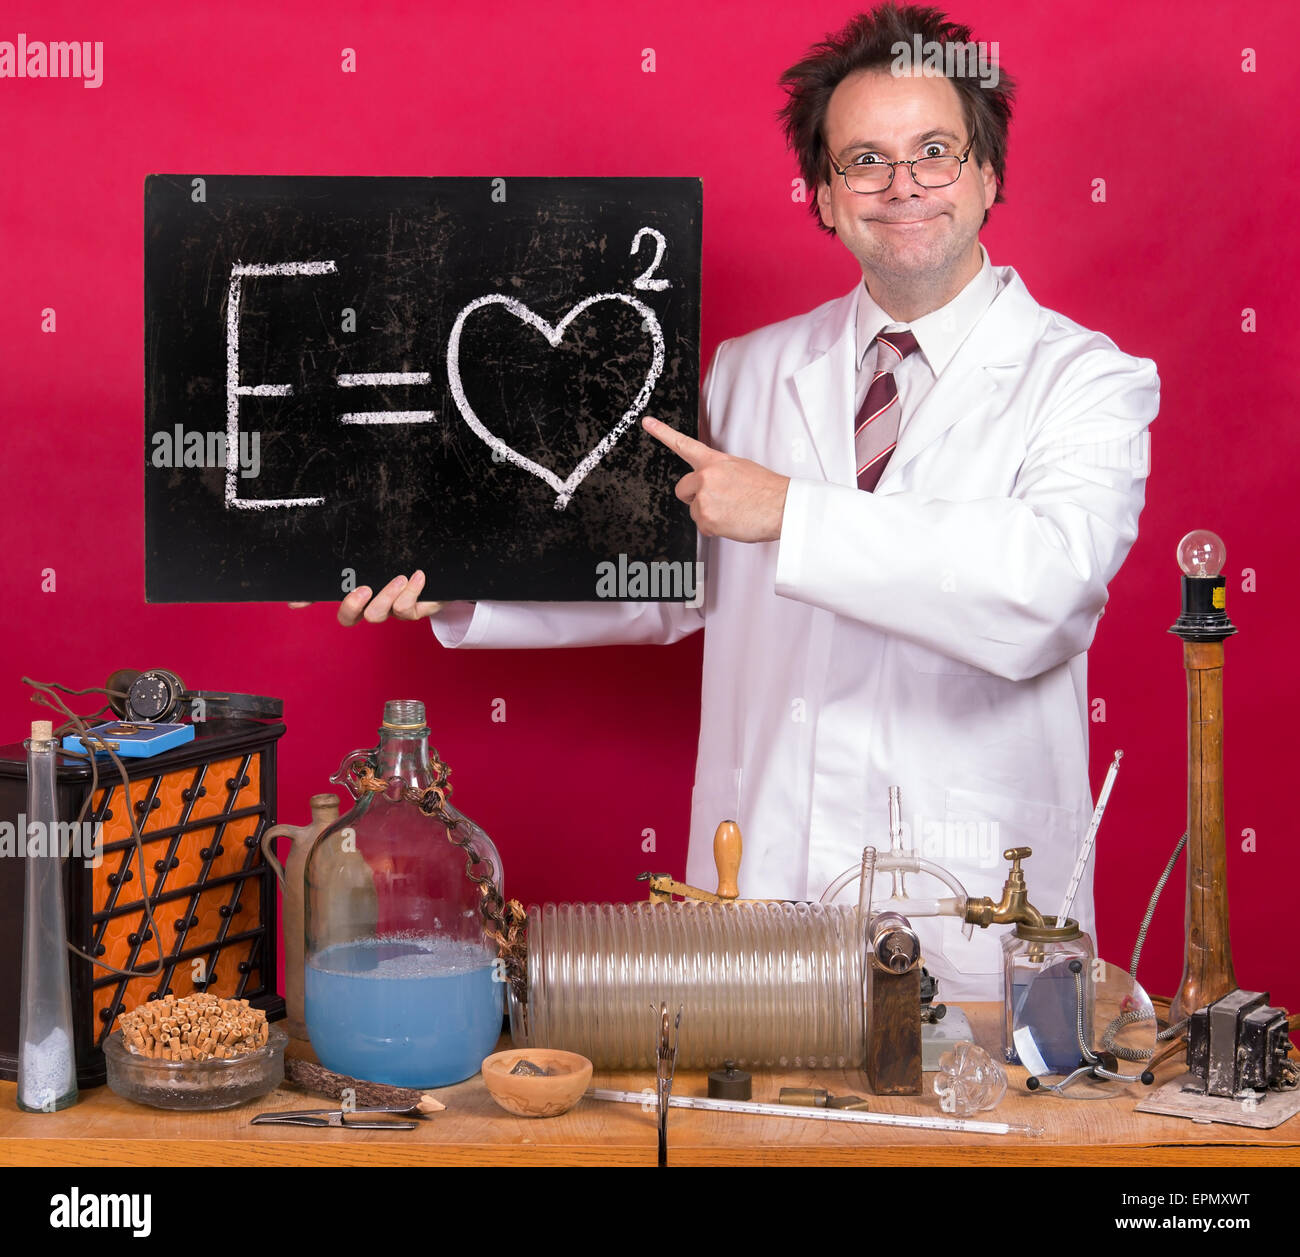 Professor in the laboratory shows a blackboard with mathematical formula Stock Photo